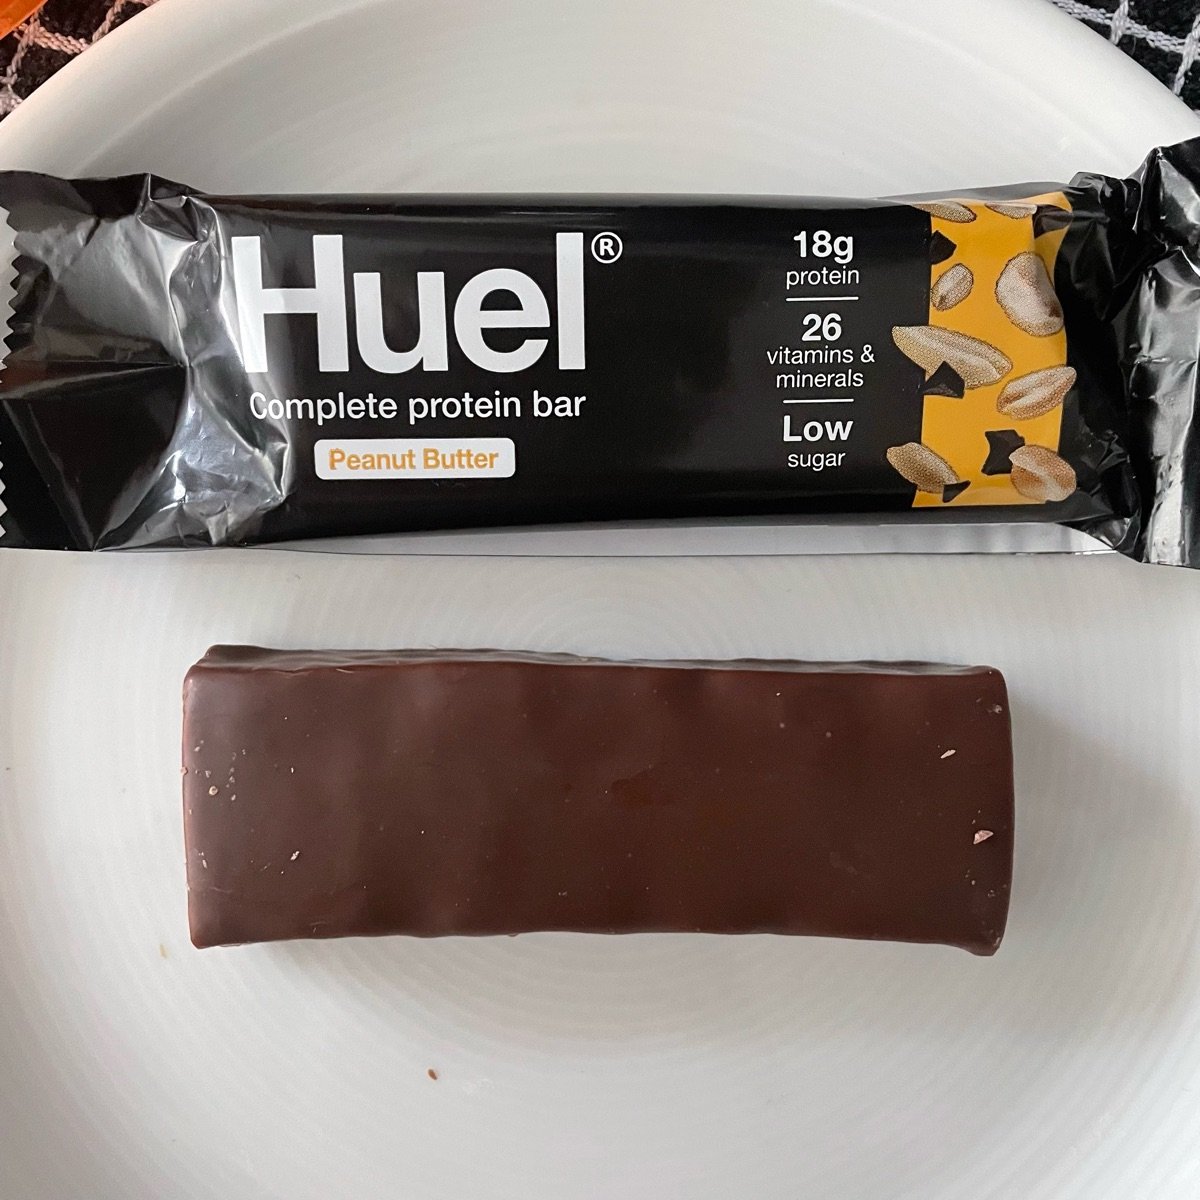 Huel debuts its first snack bars in the U.S., 2019-12-19